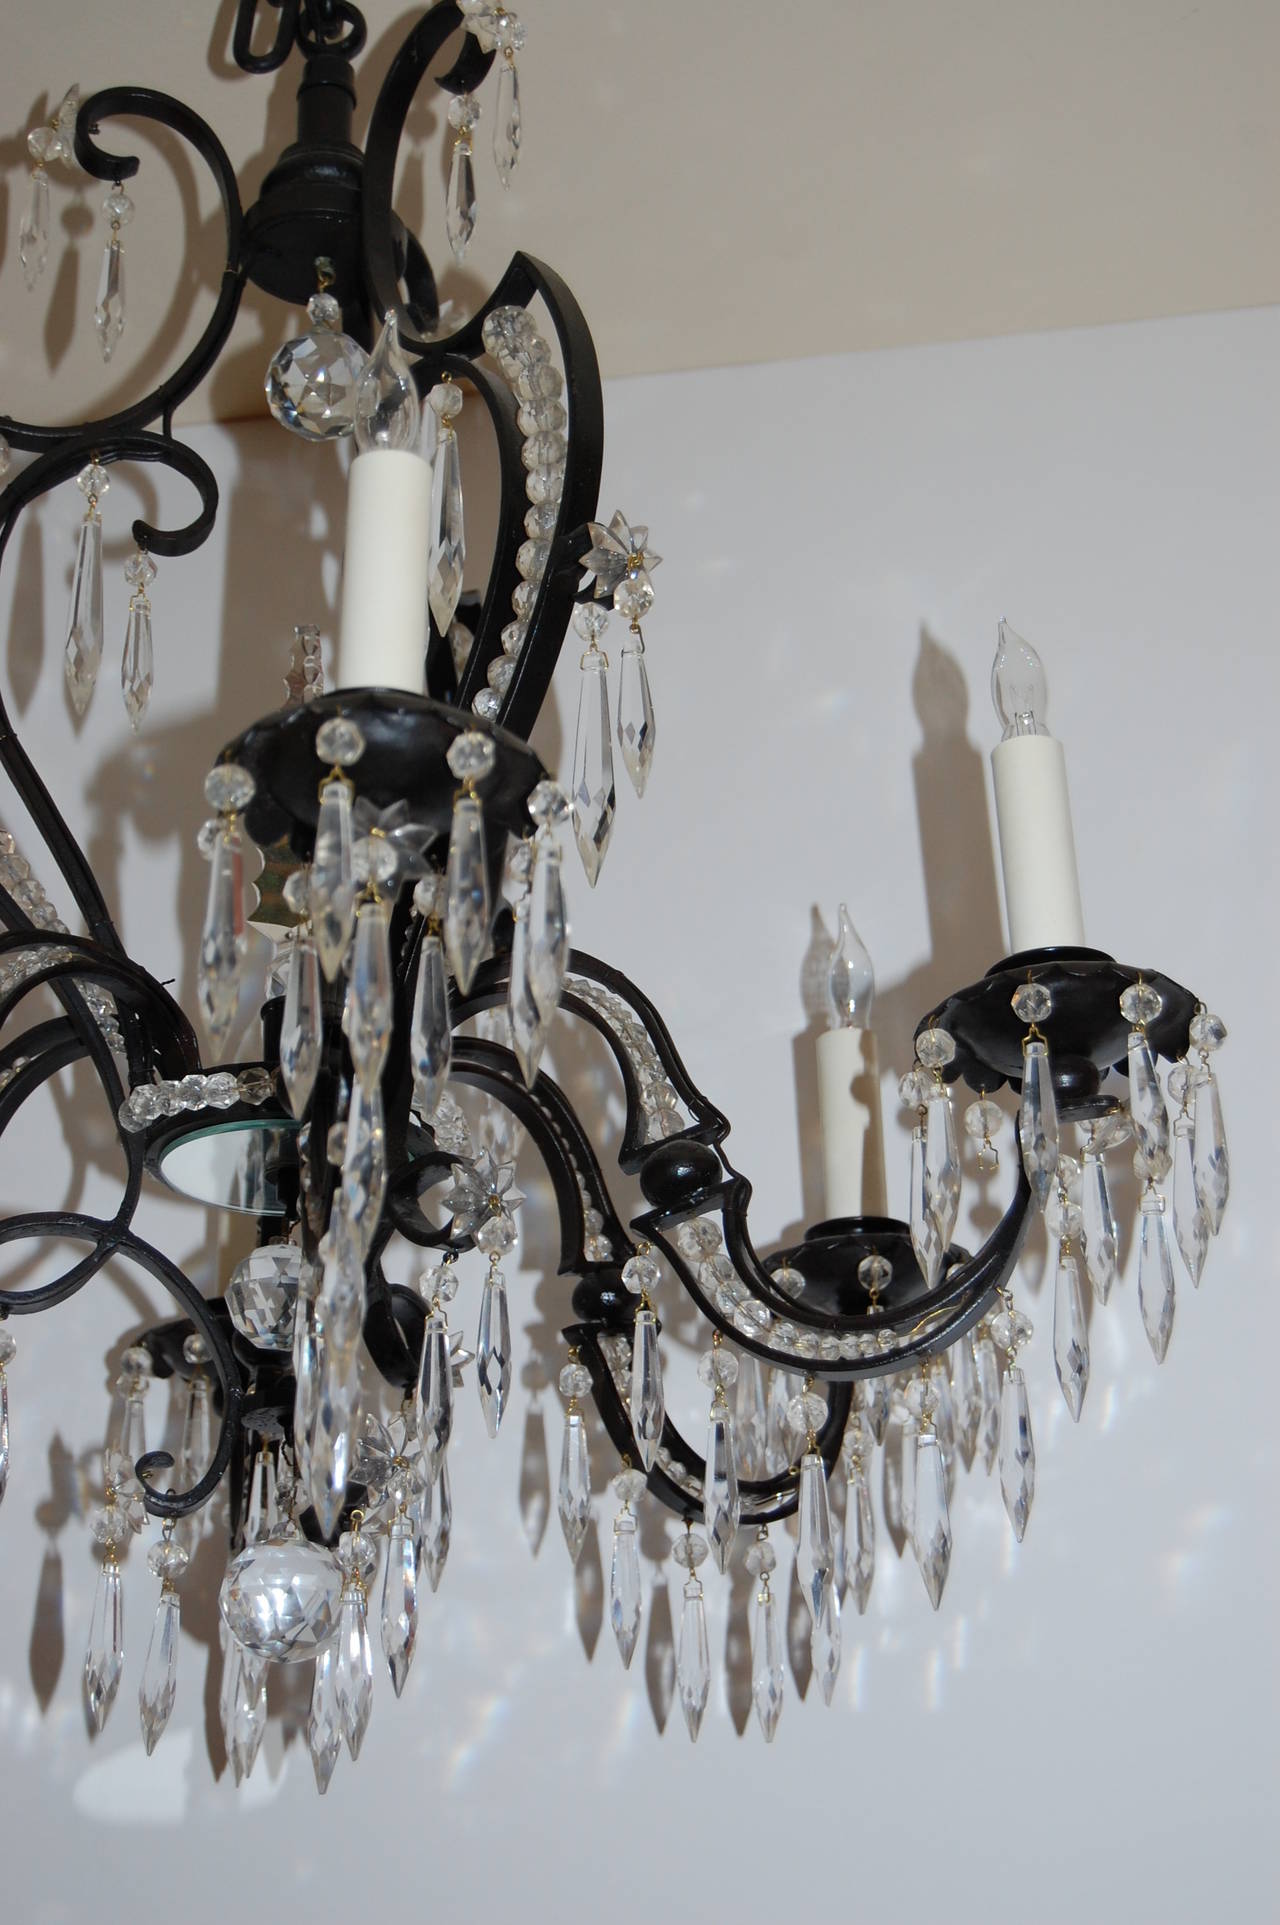 Iron and Crystal Six-Light Chandelier, circa 1920s - 1930s For Sale 1